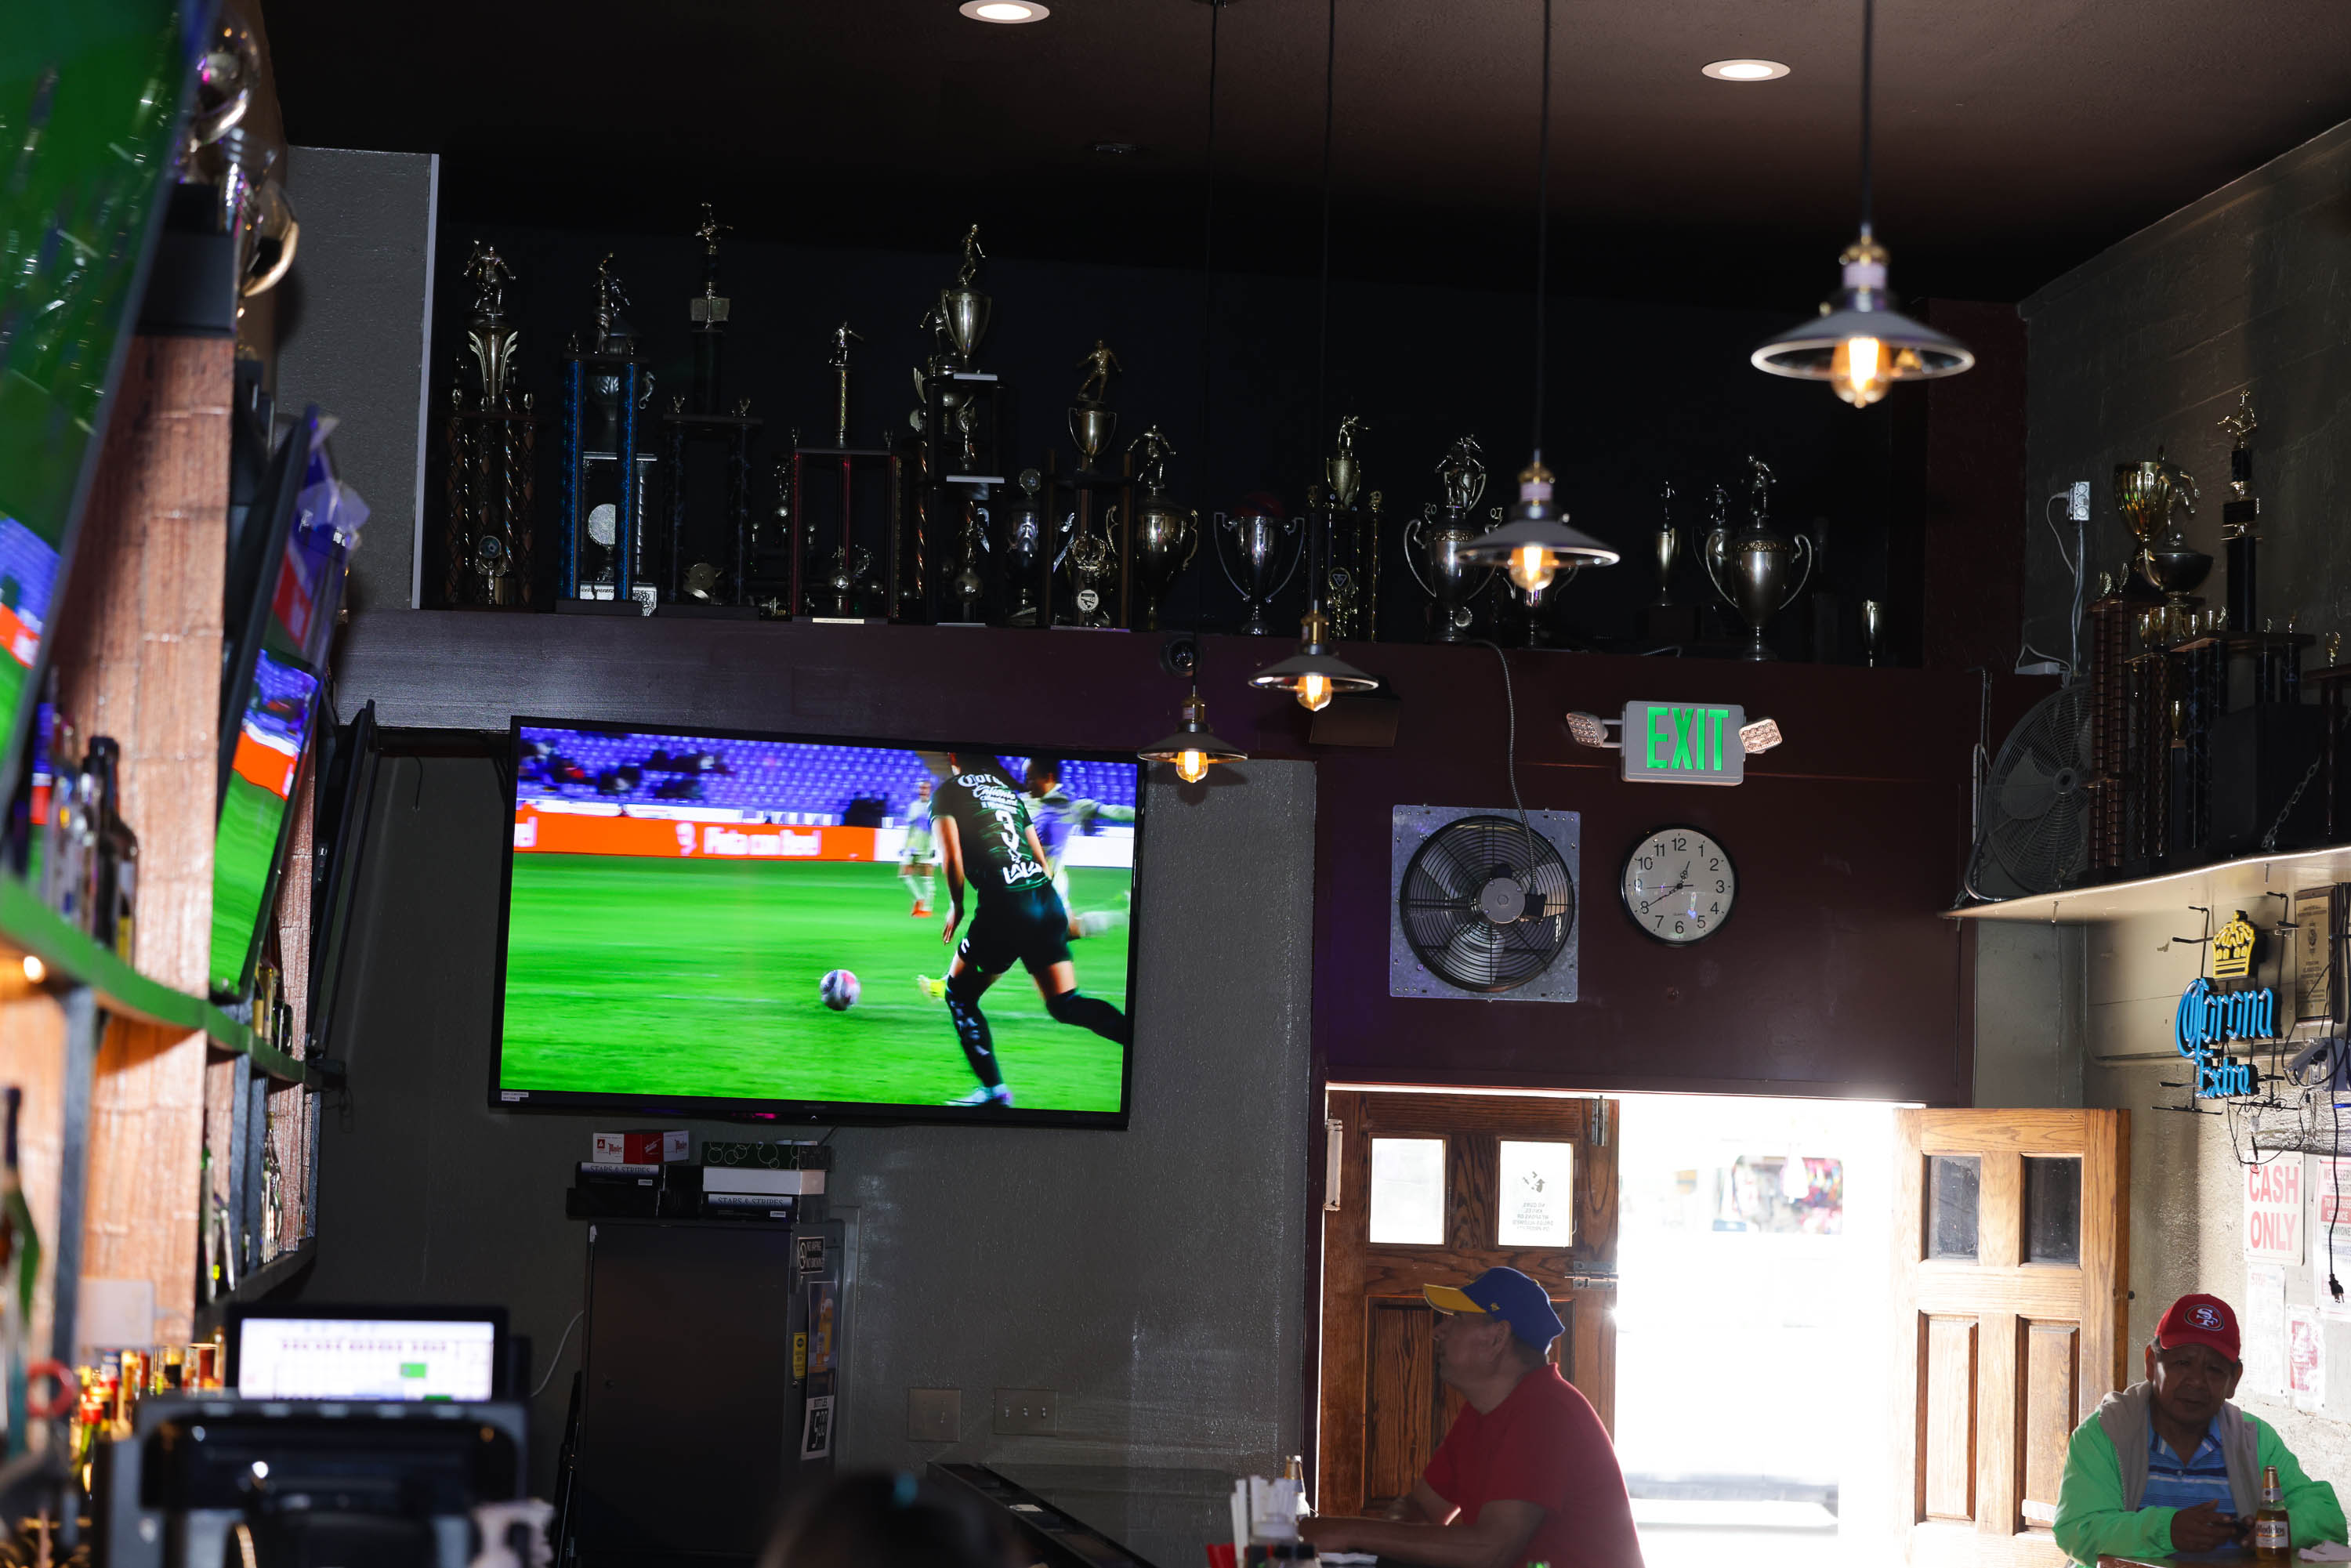 A dimly lit bar with a TV showing soccer, patrons seated, trophies displayed, and an &quot;EXIT&quot; sign illuminated.